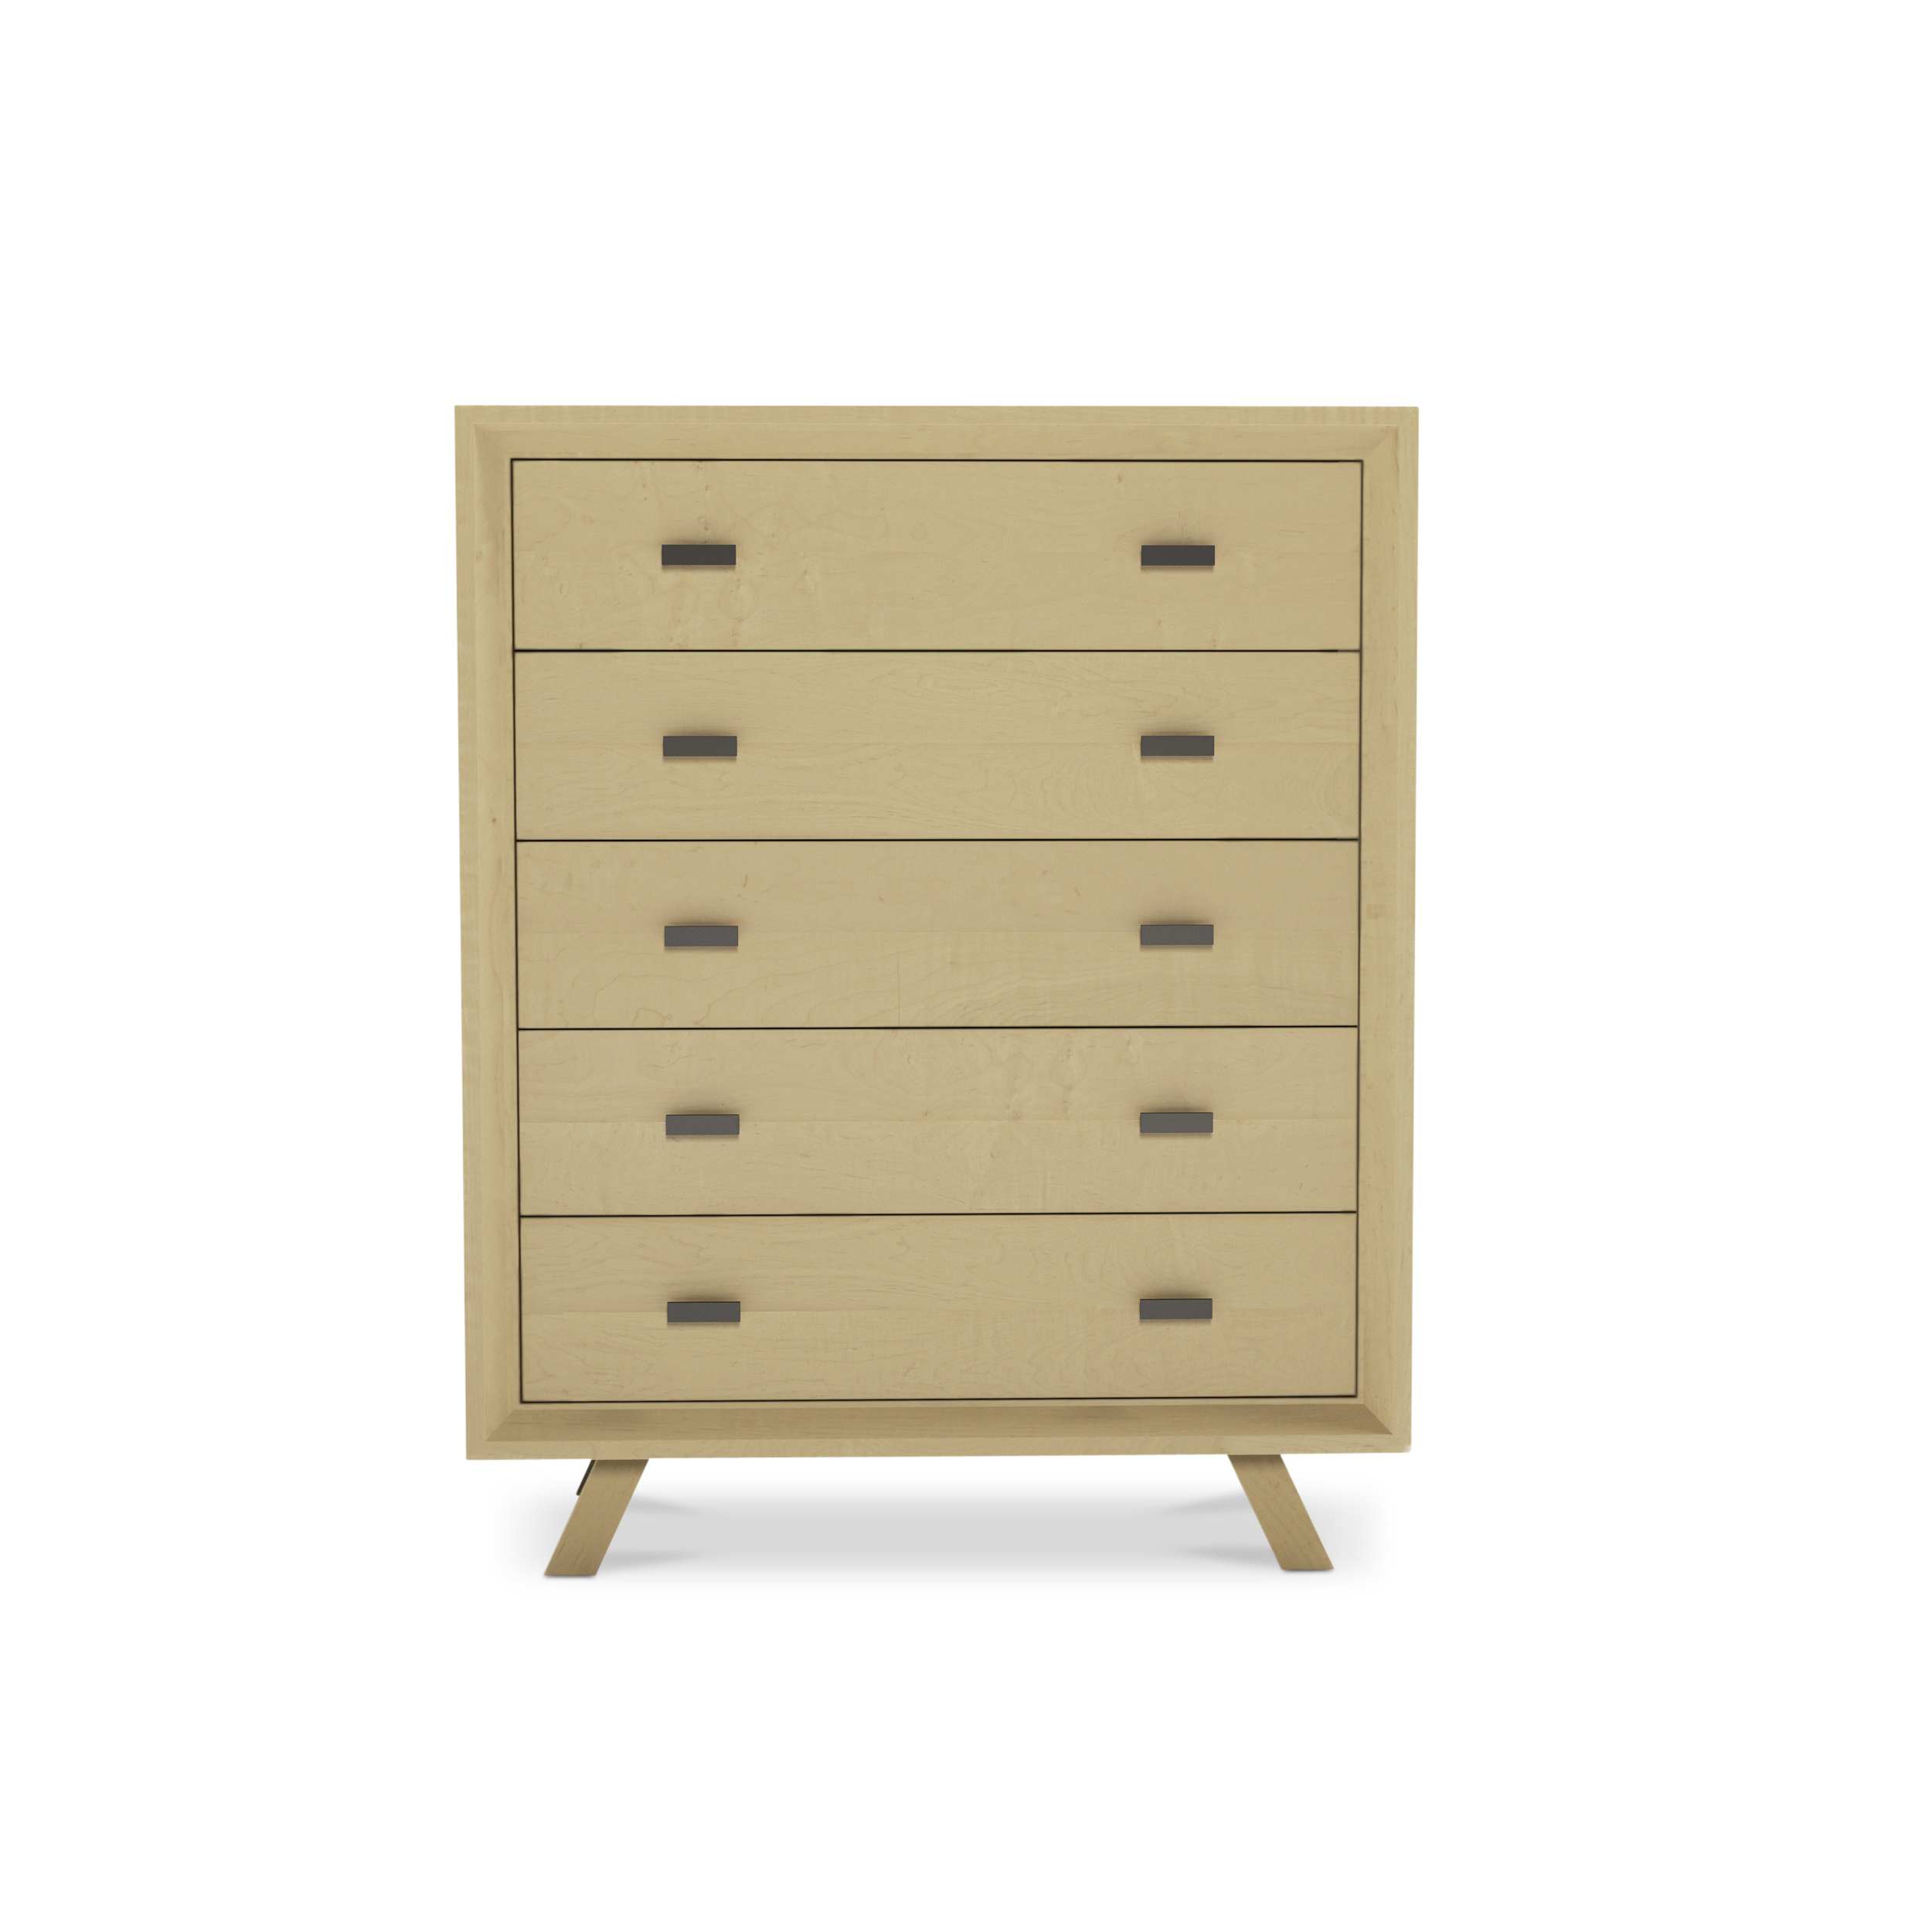 Series 555 Tall Dresser With Five Drawers At 36″ In Width